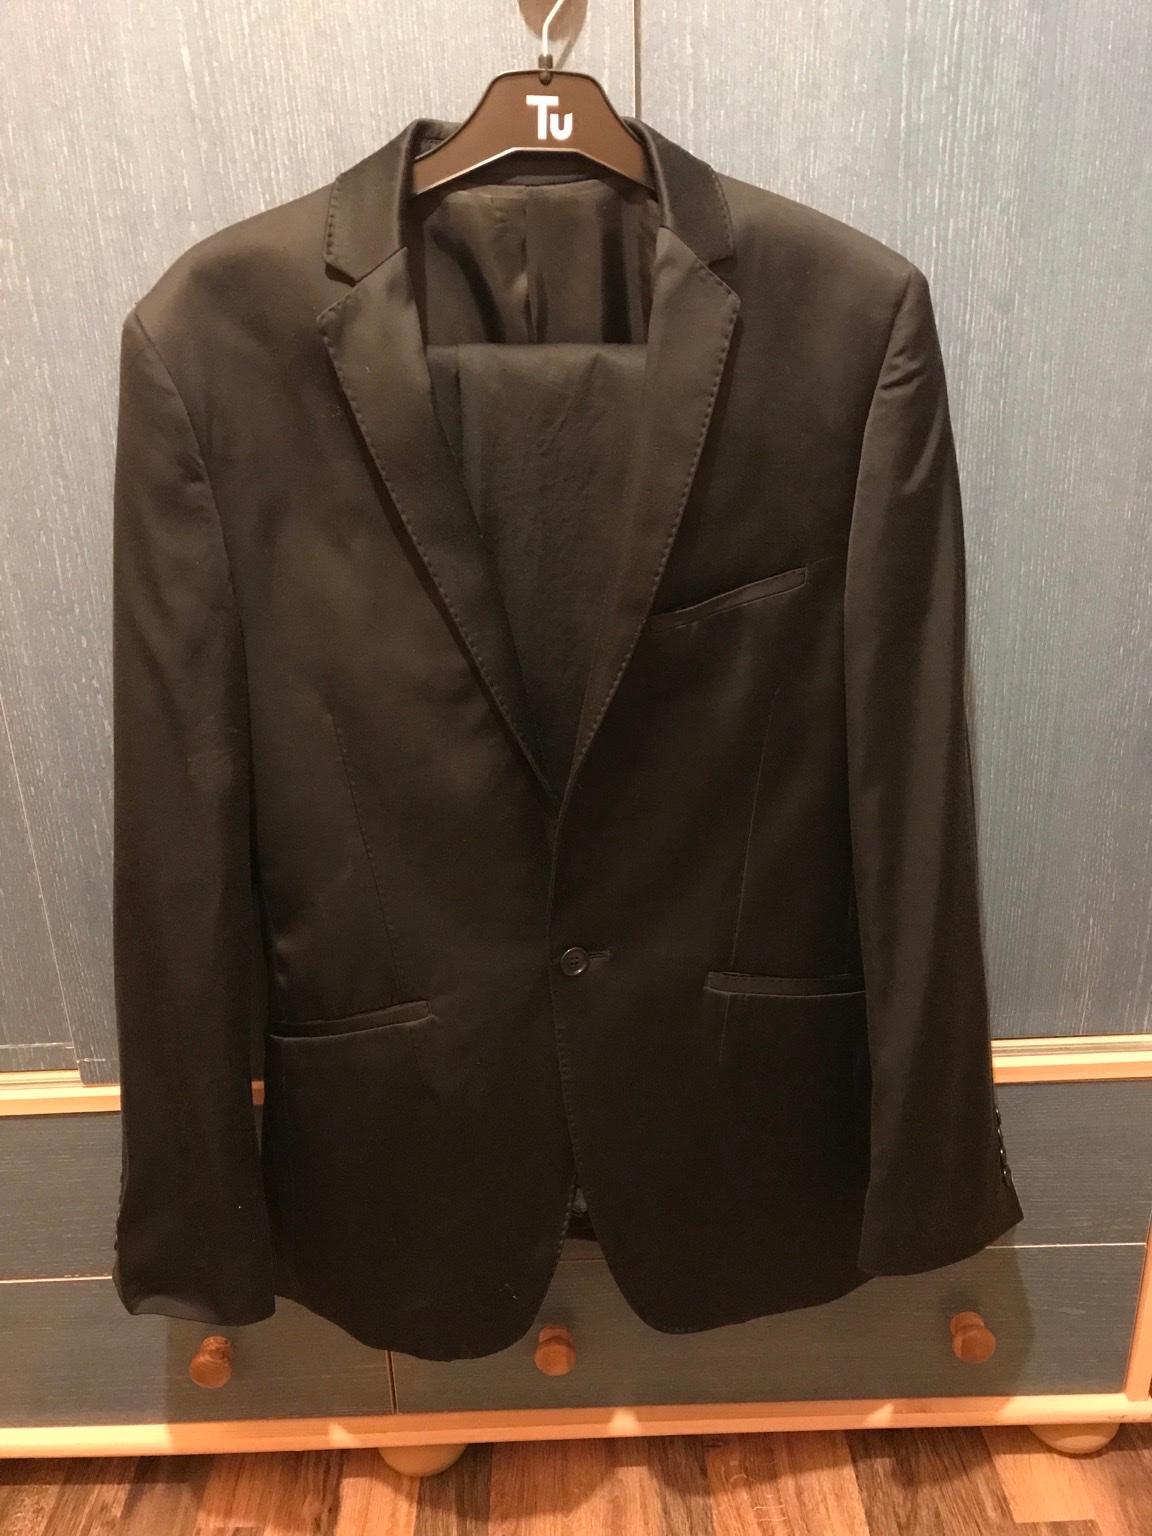 Lambretta Men’s Suit in DY4 Sandwell for £38.00 for sale | Shpock